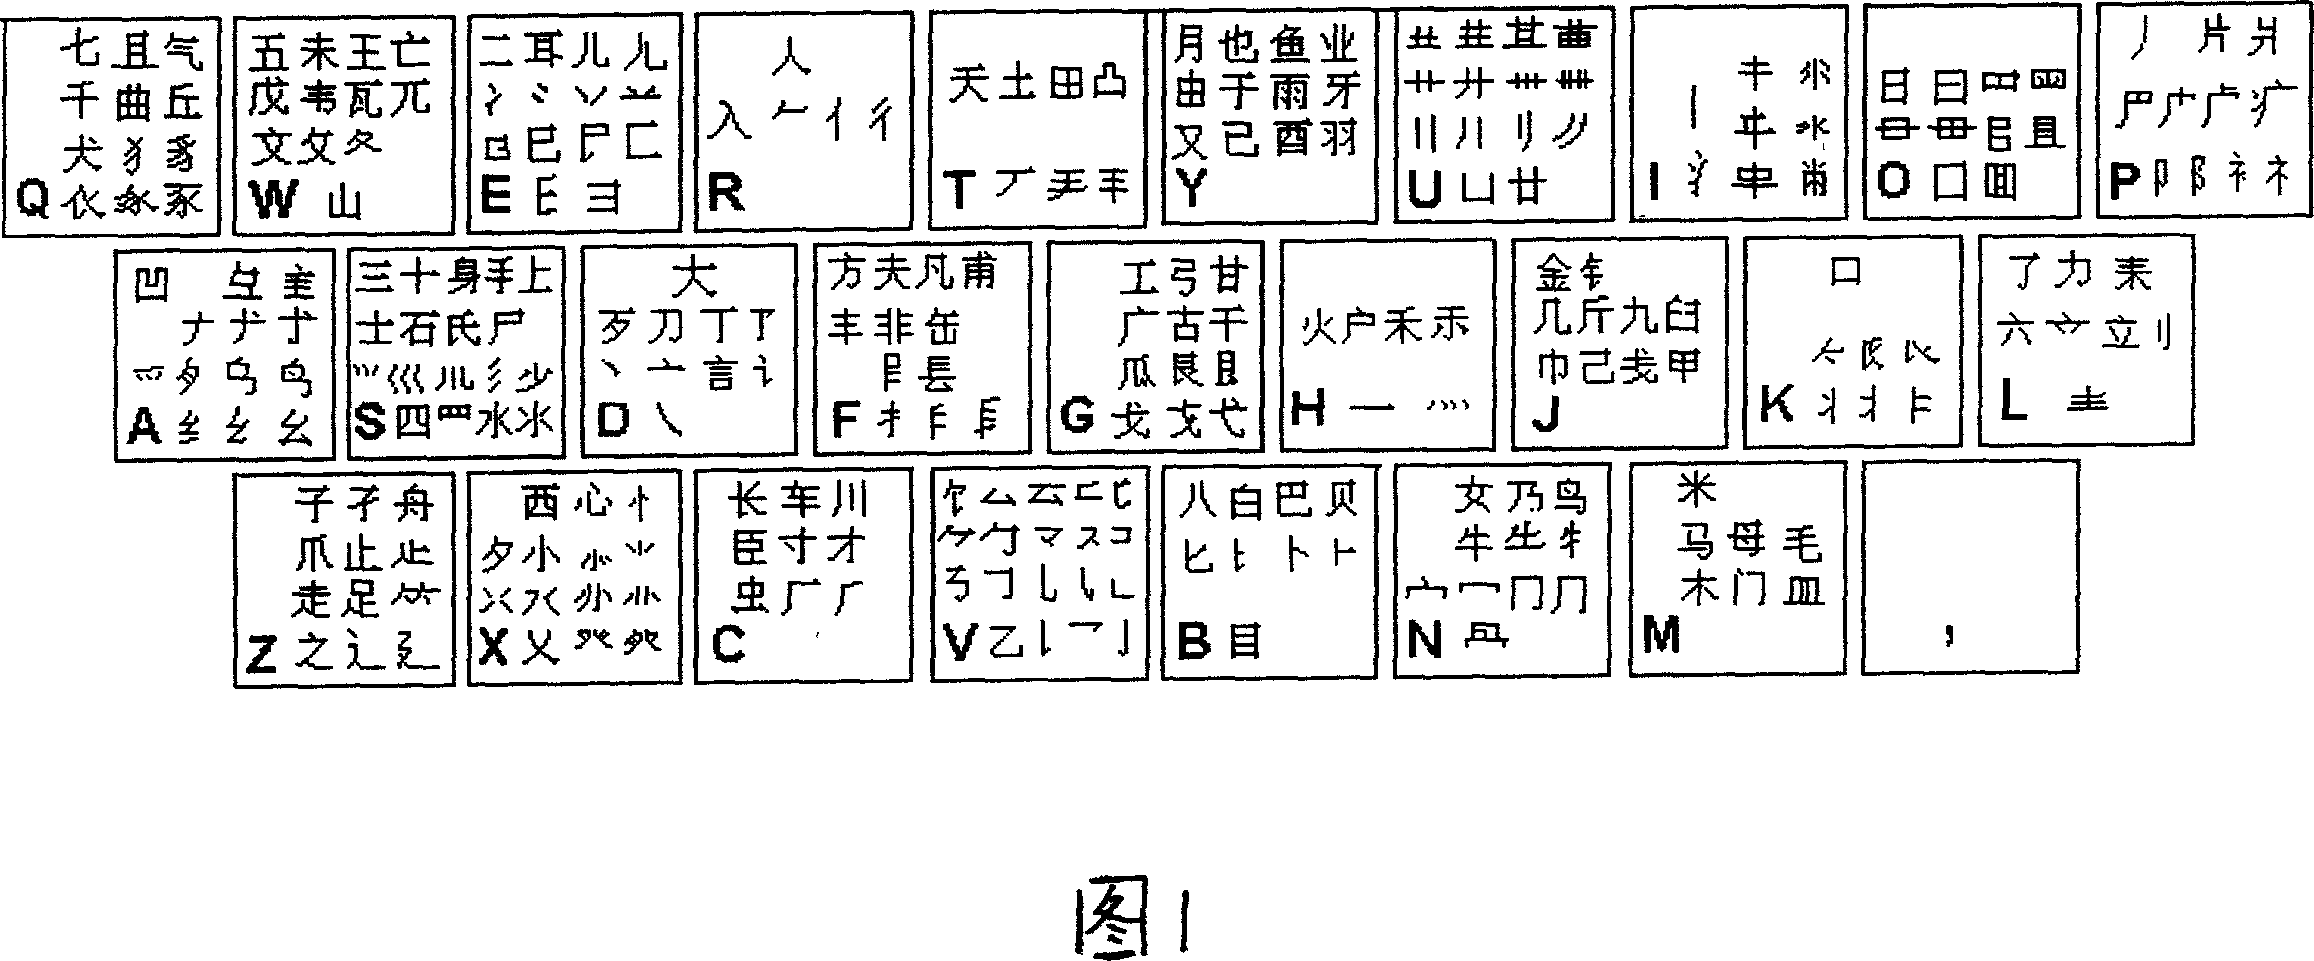 Chinese character inputting method